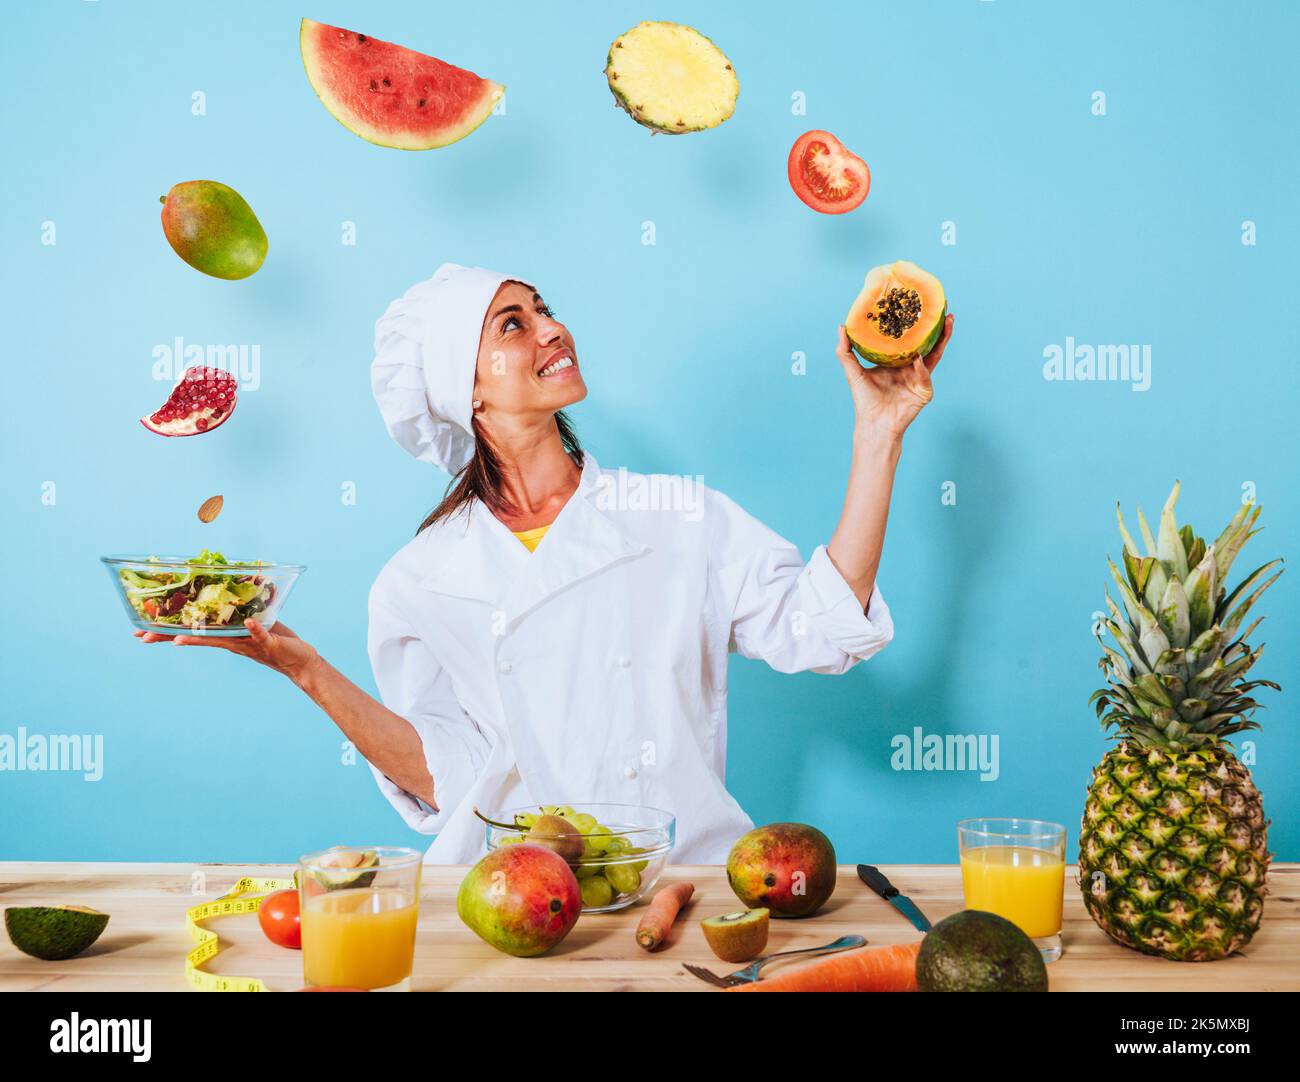 Woman chef prepares a new receipt with fruits Stock Photo